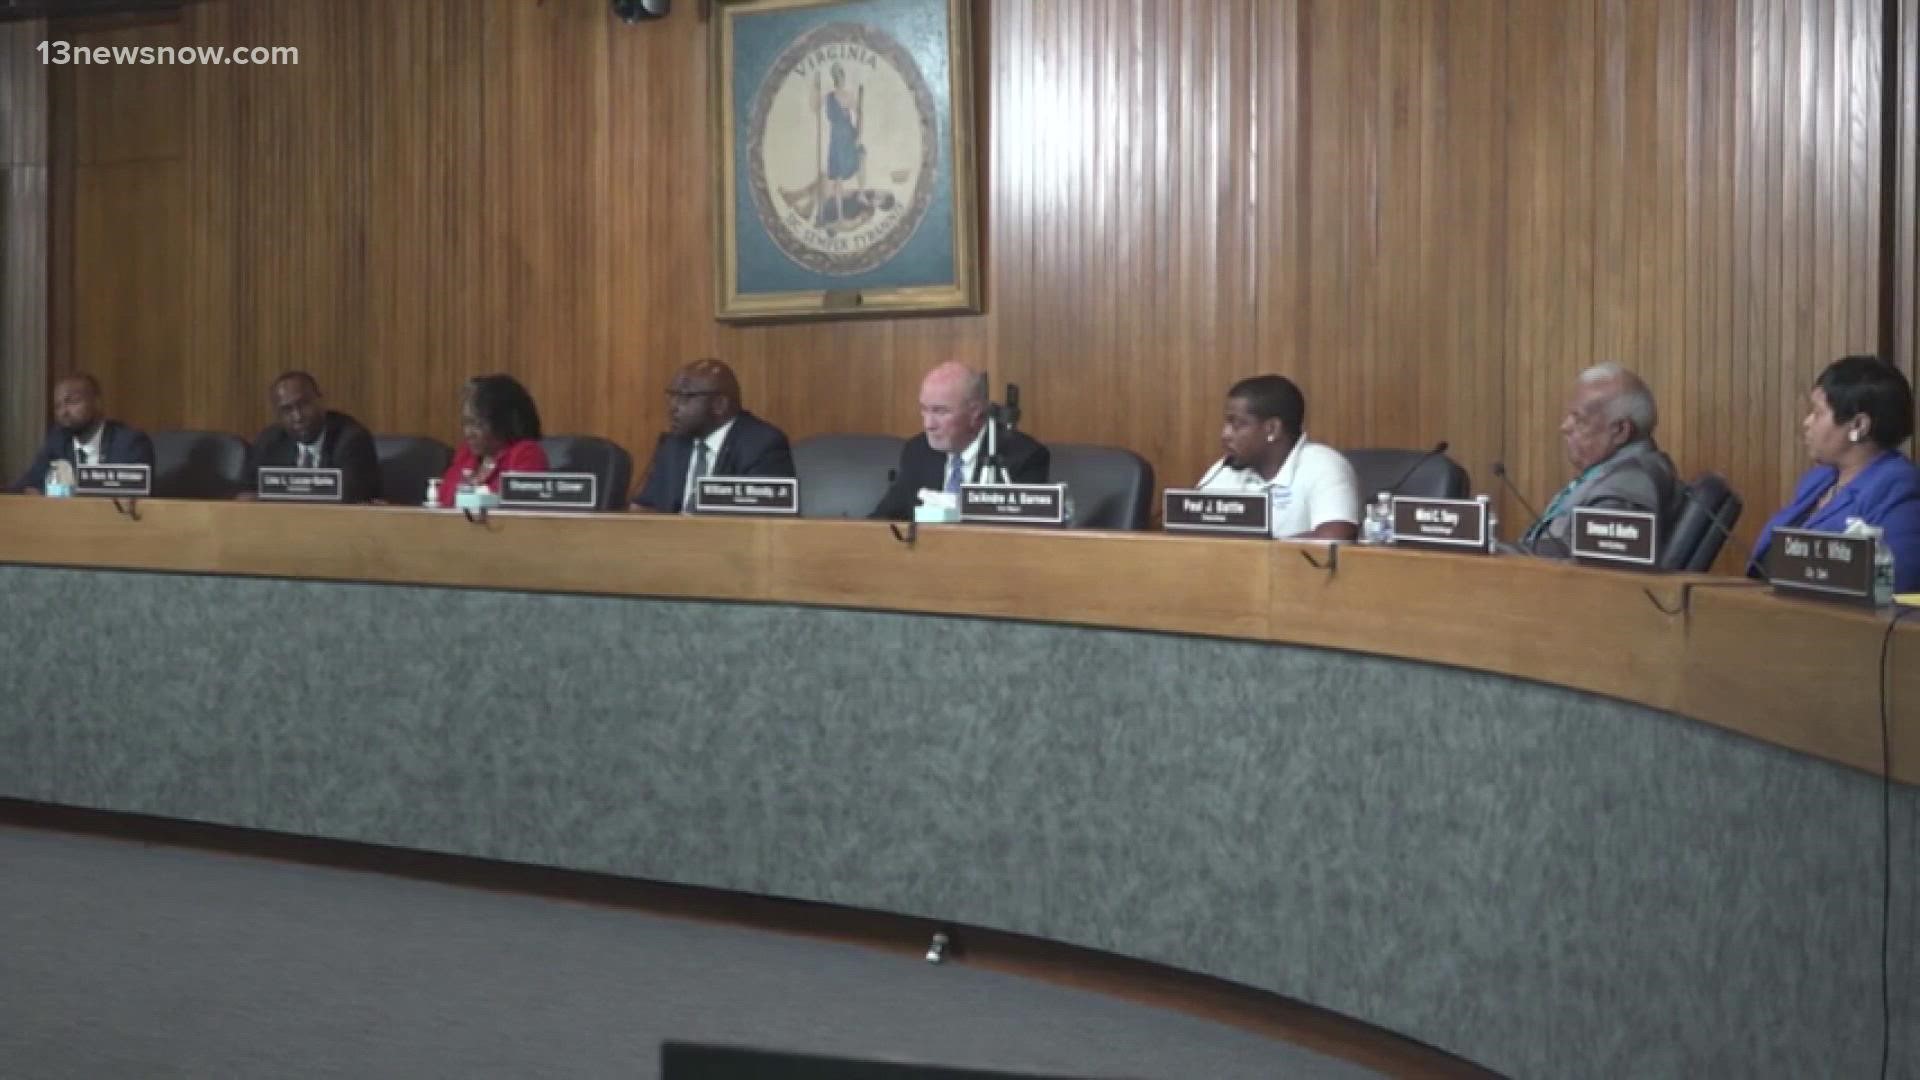 Some Portsmouth residents are frustrated with the way Portsmouth City leaders fired former city manager Angel Jones.